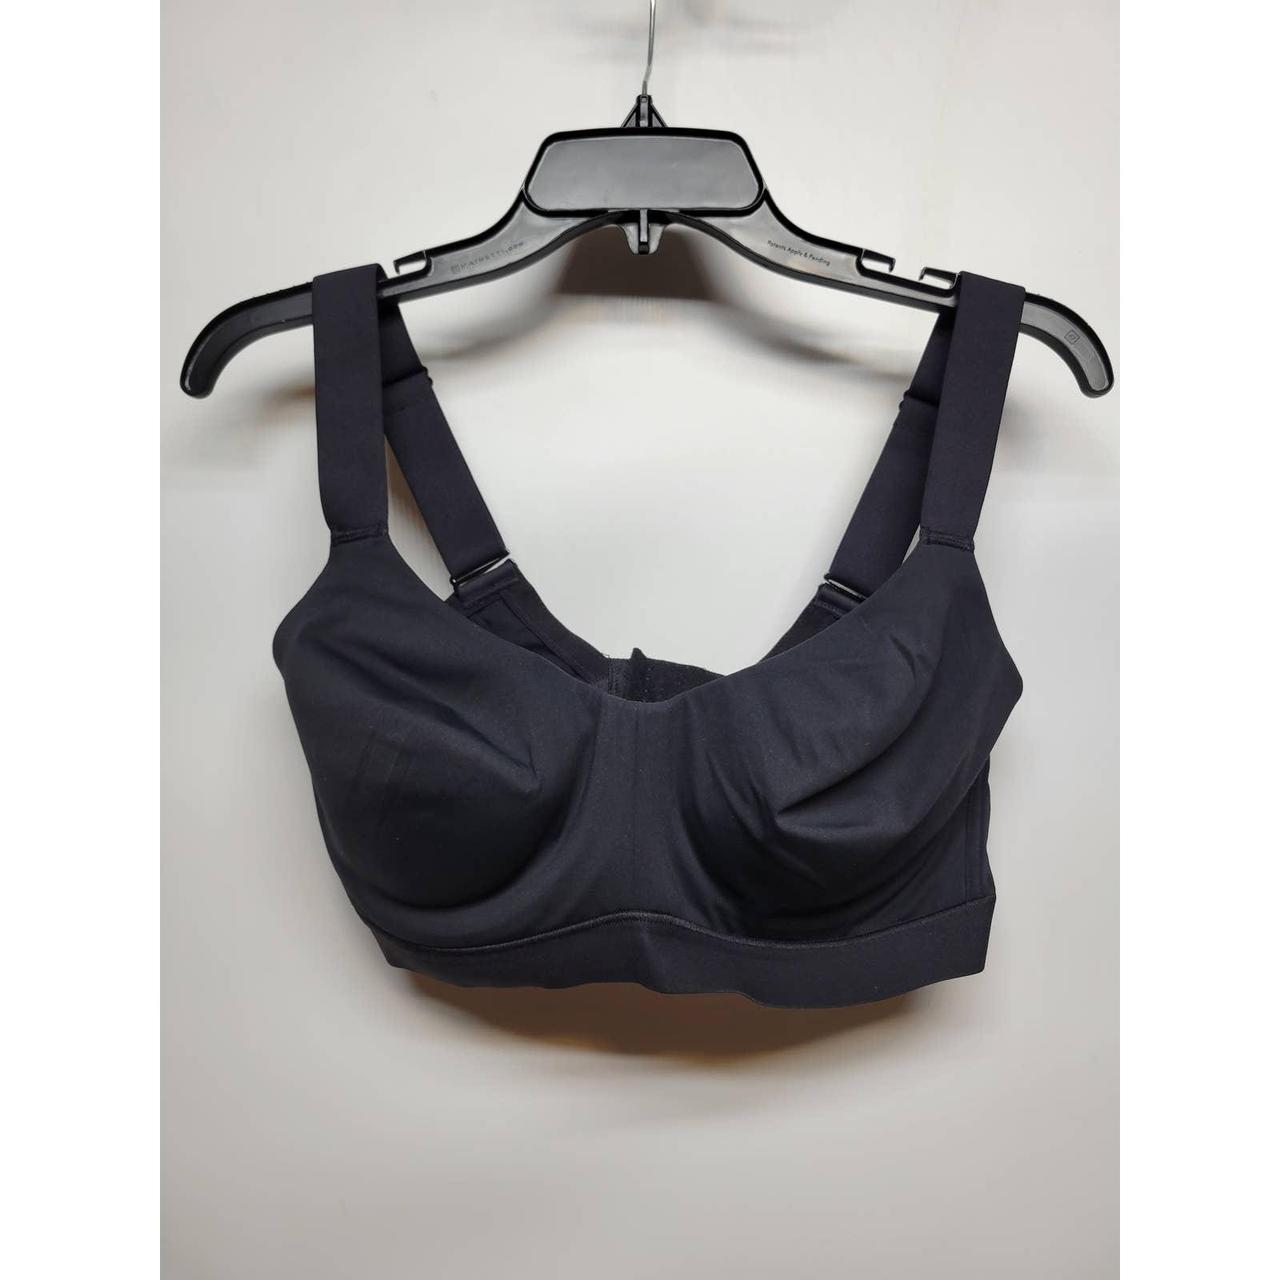 Product Image 1 - Natori
New without tags
Size 38D 
Black
Underwire